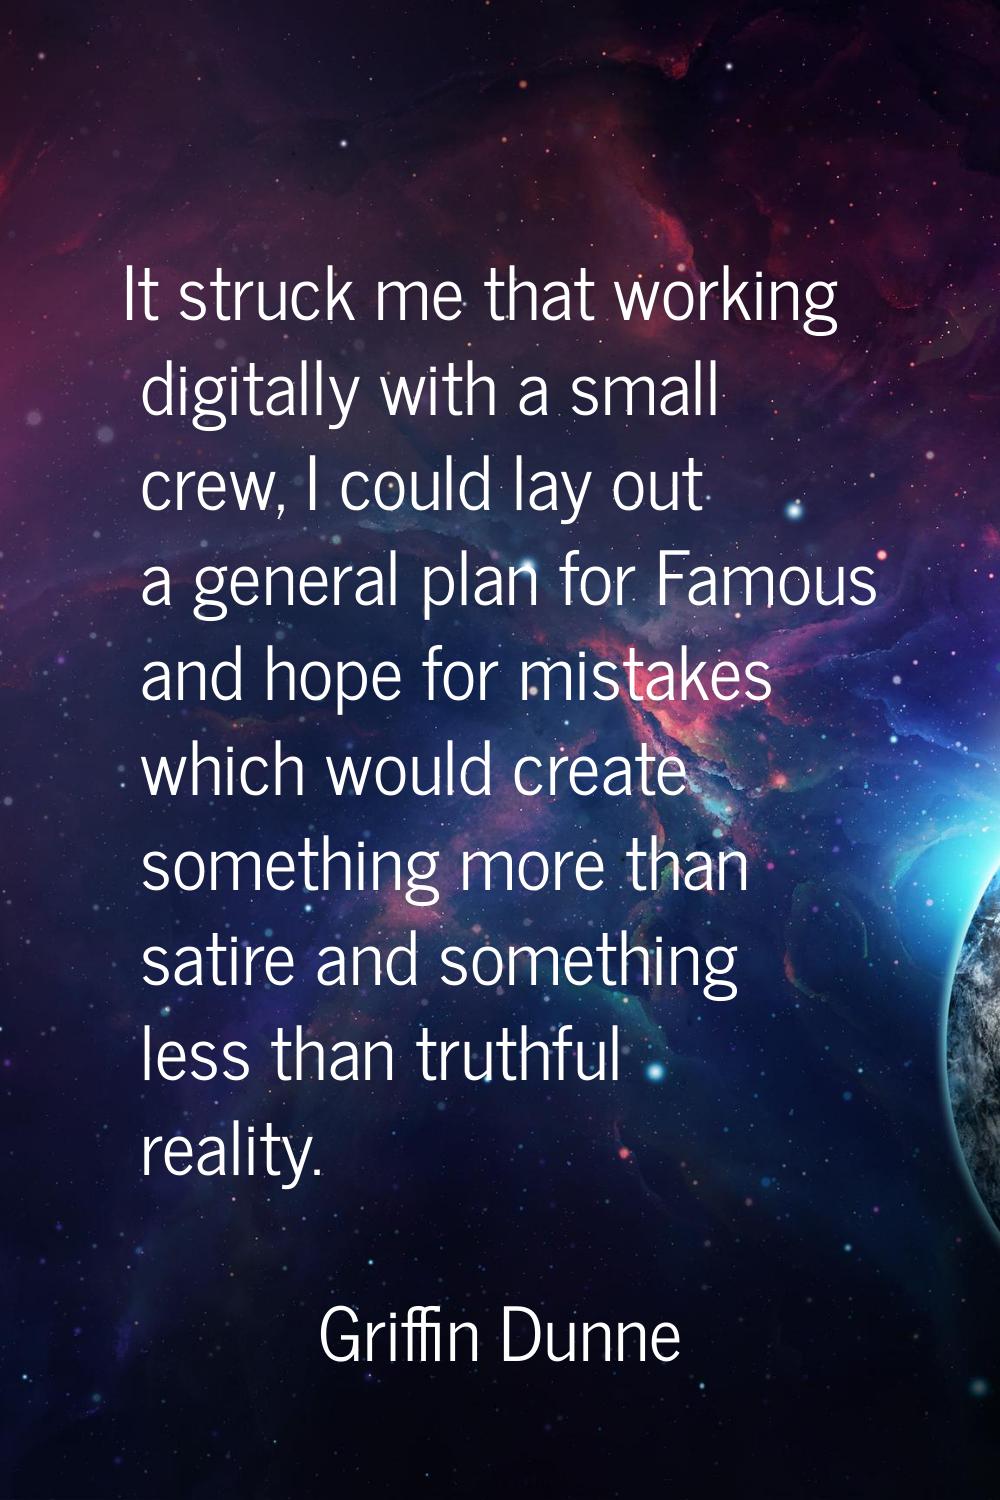 It struck me that working digitally with a small crew, I could lay out a general plan for Famous an